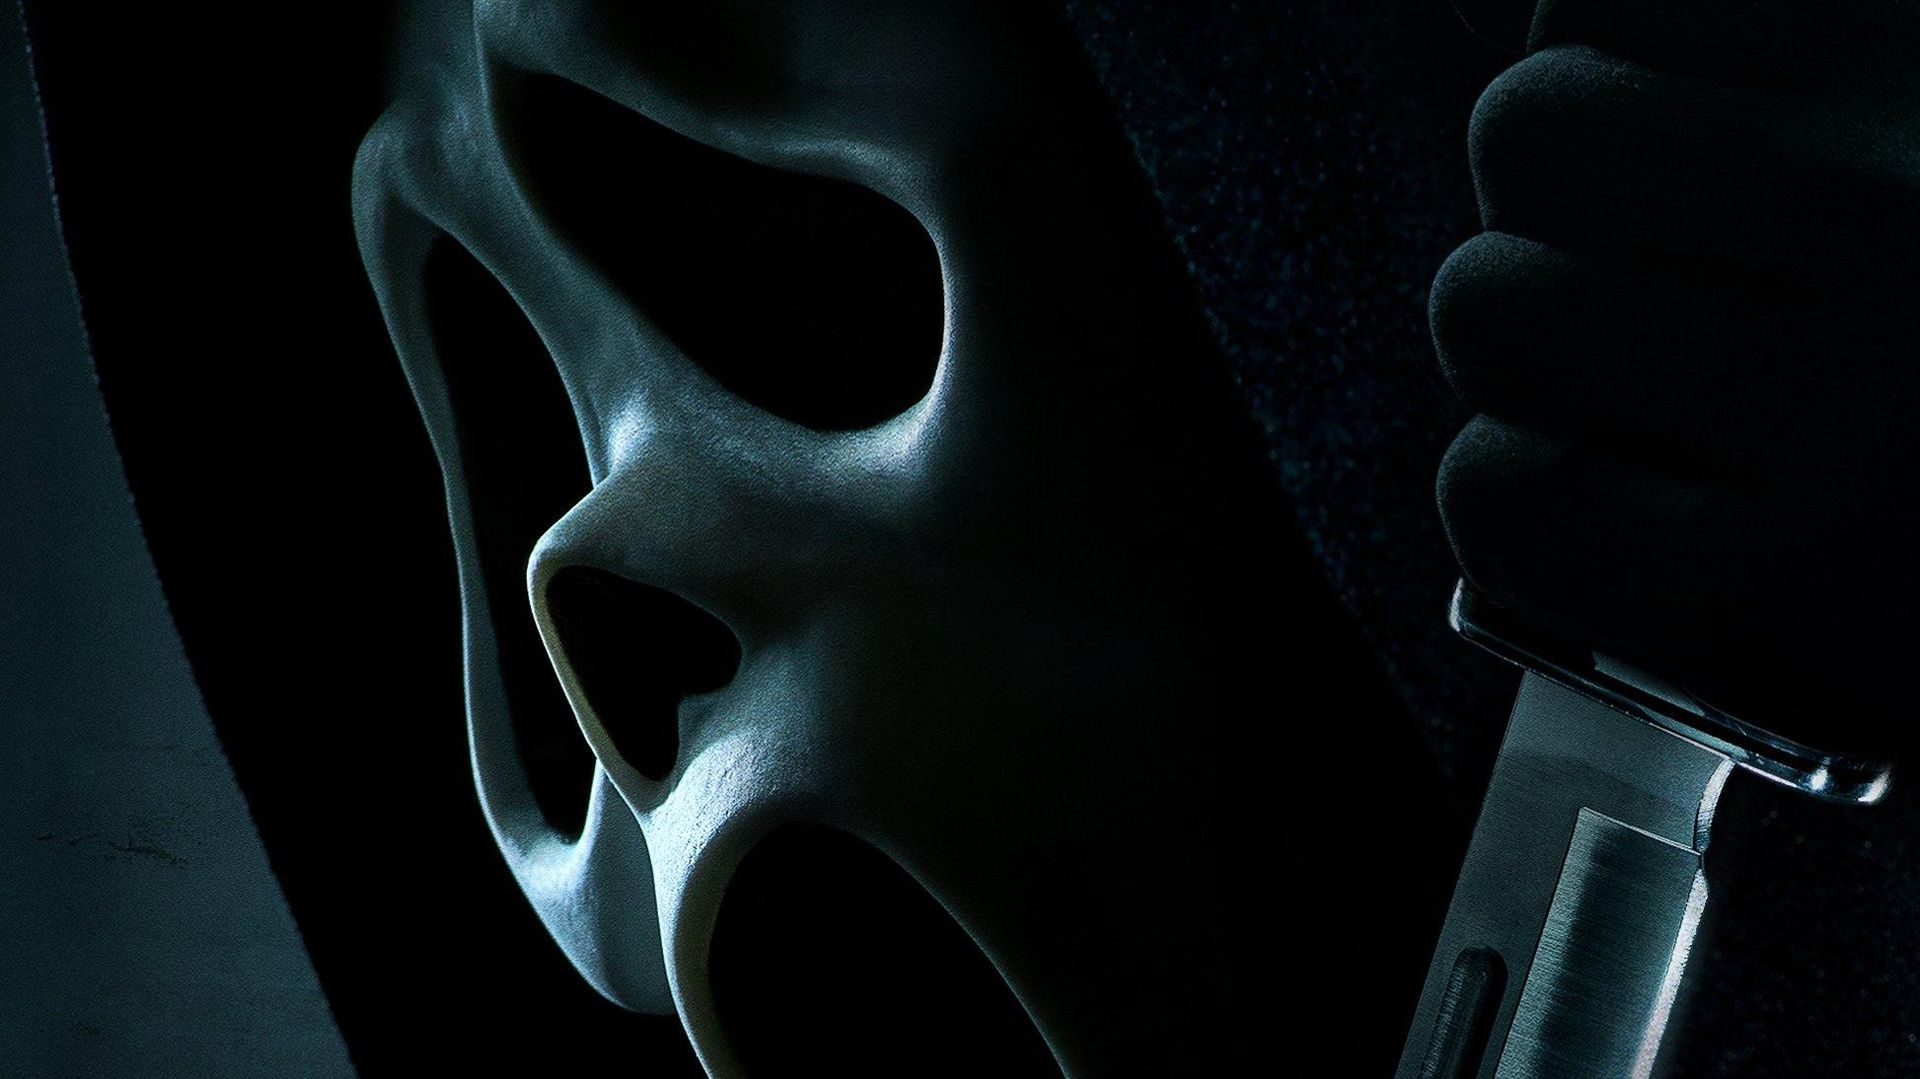 Scream 6 gets the green light as reboot kills it at the box office